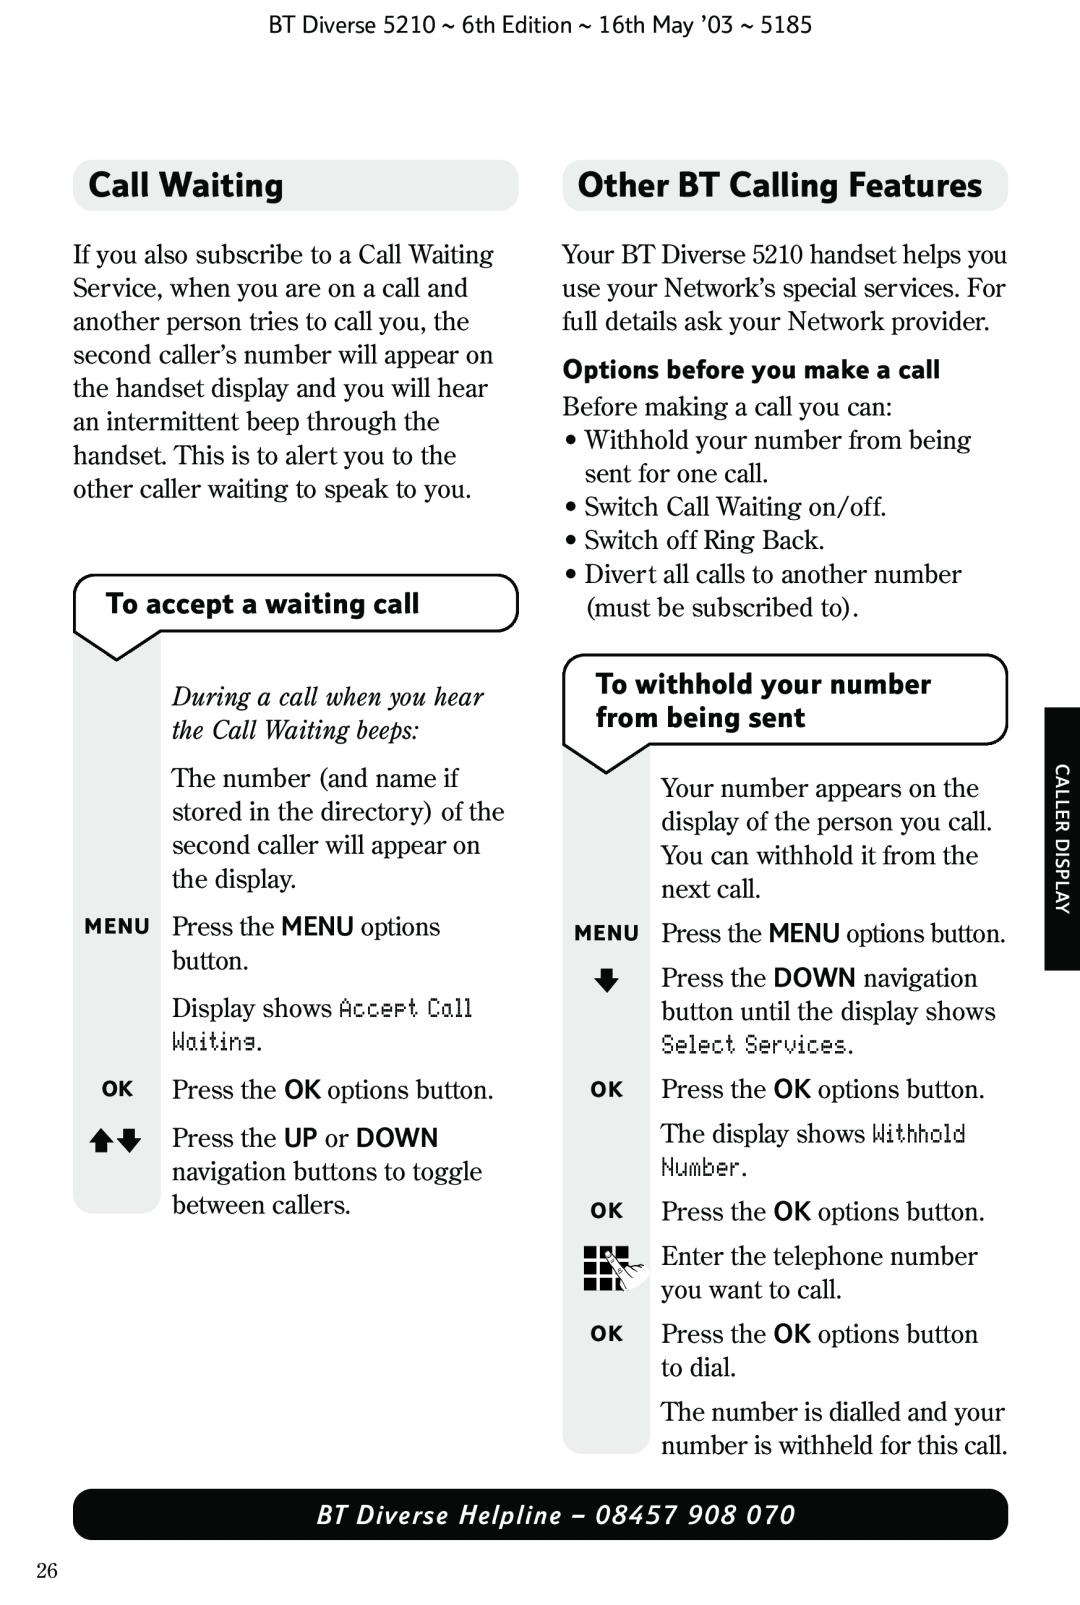 BT 5210 manual Call Waiting, Other BT Calling Features, To accept a waiting call, To withhold your number from being sent 